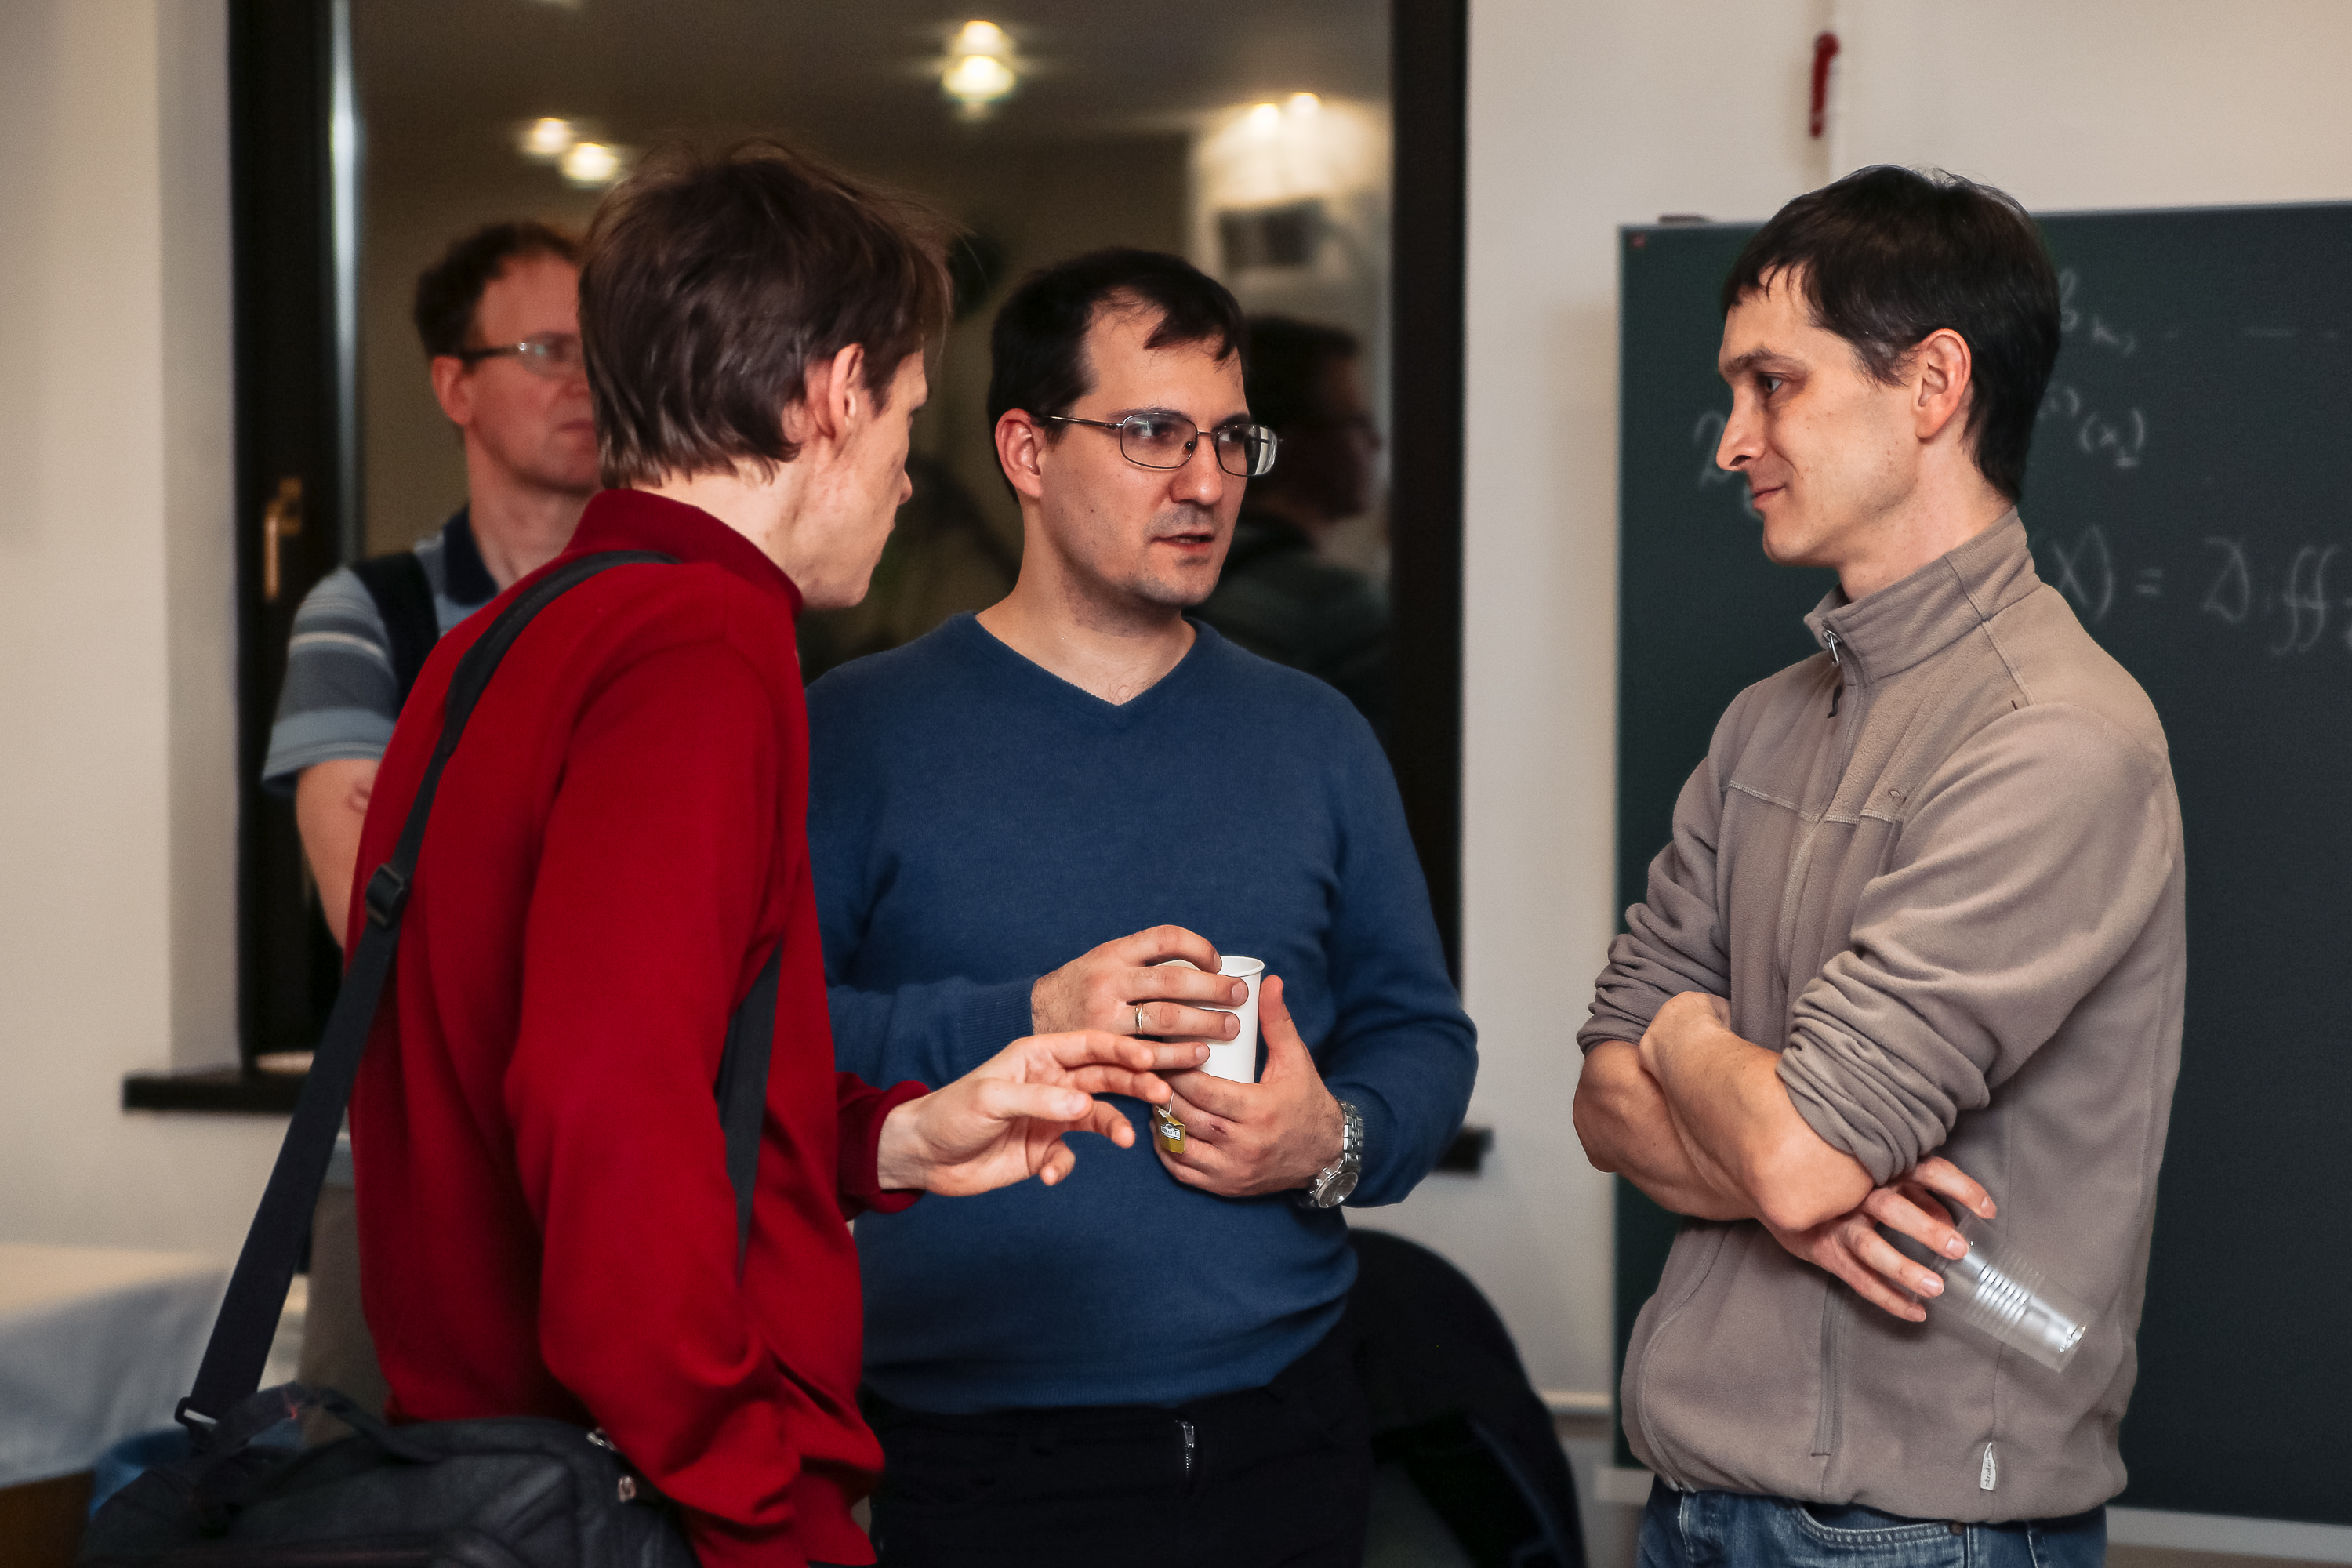 Roman Avdeev and Sergey Gaifullin at X school-conference "Lie algebras, algebraic groups and invariant theory", Steklov Mathematical Institute, Moscow, January 2023